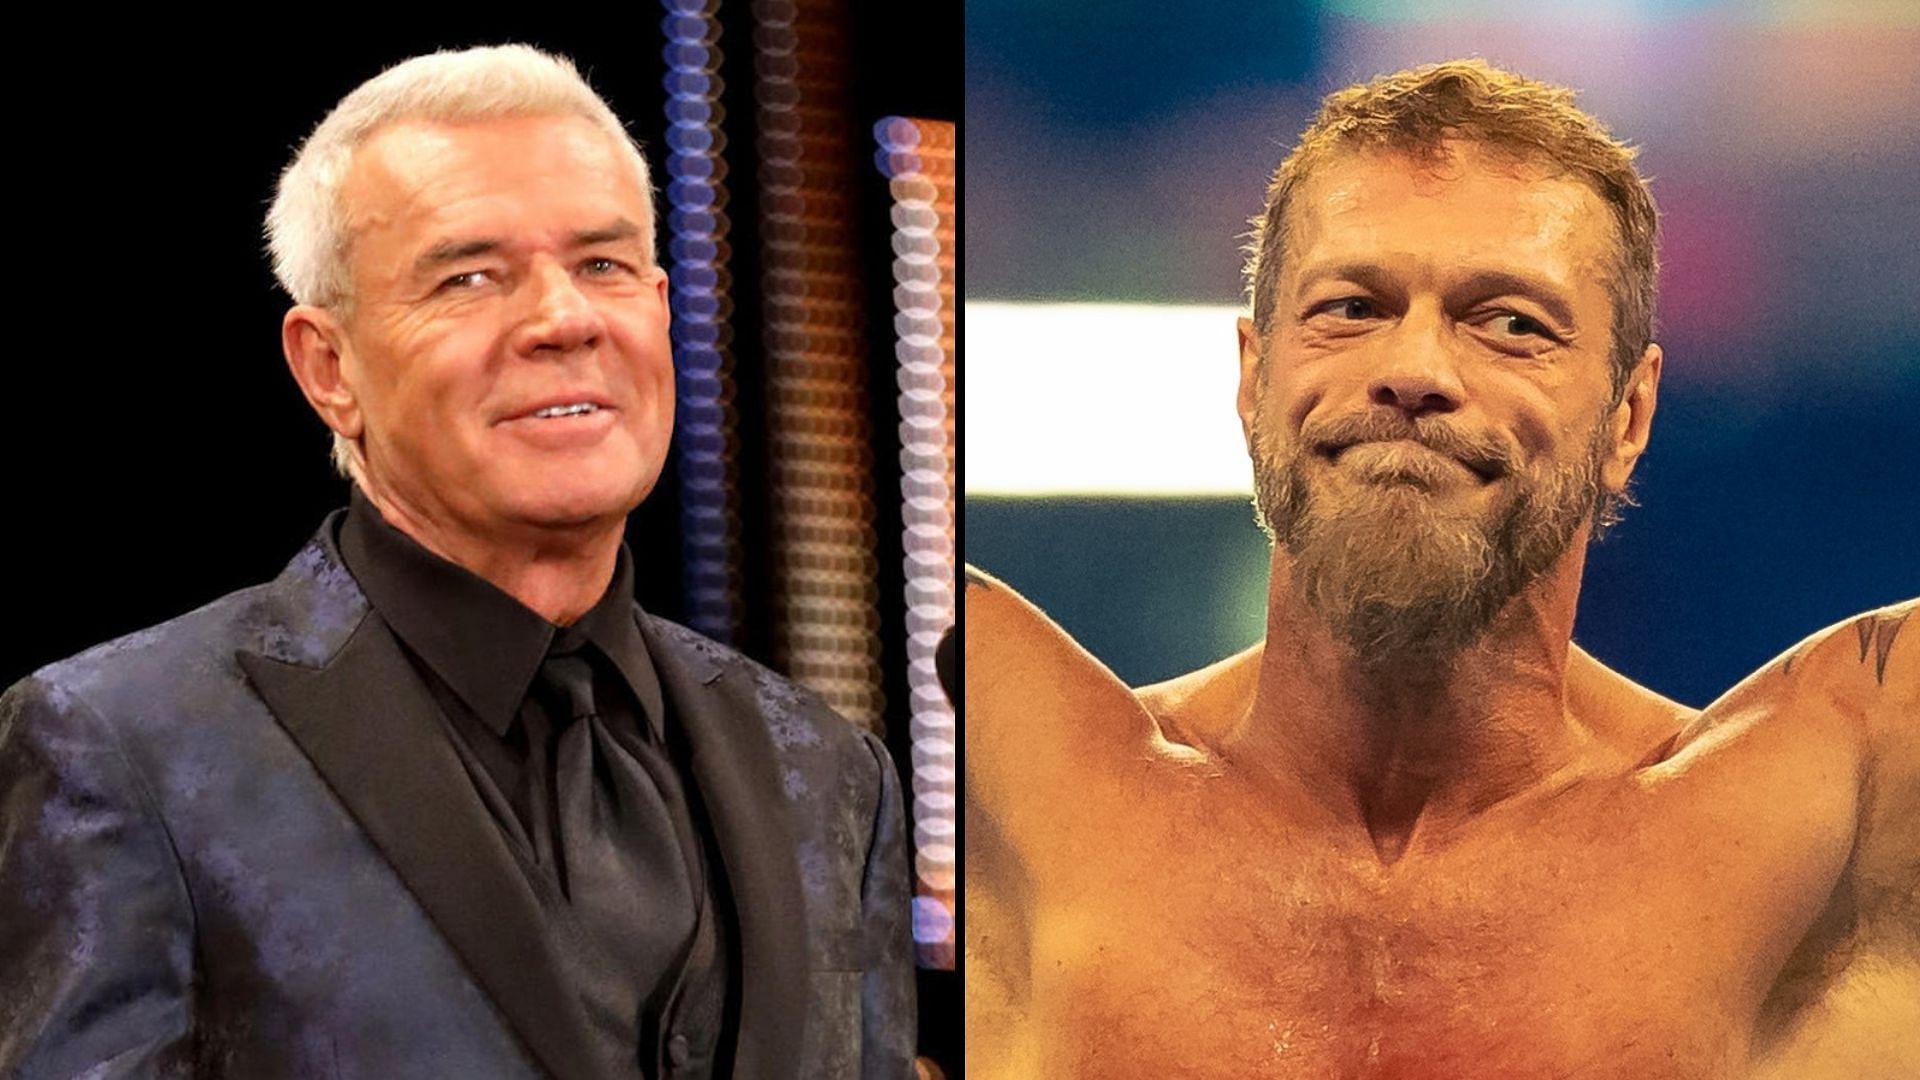 Eric Bischoff and Edge both worked for WWE